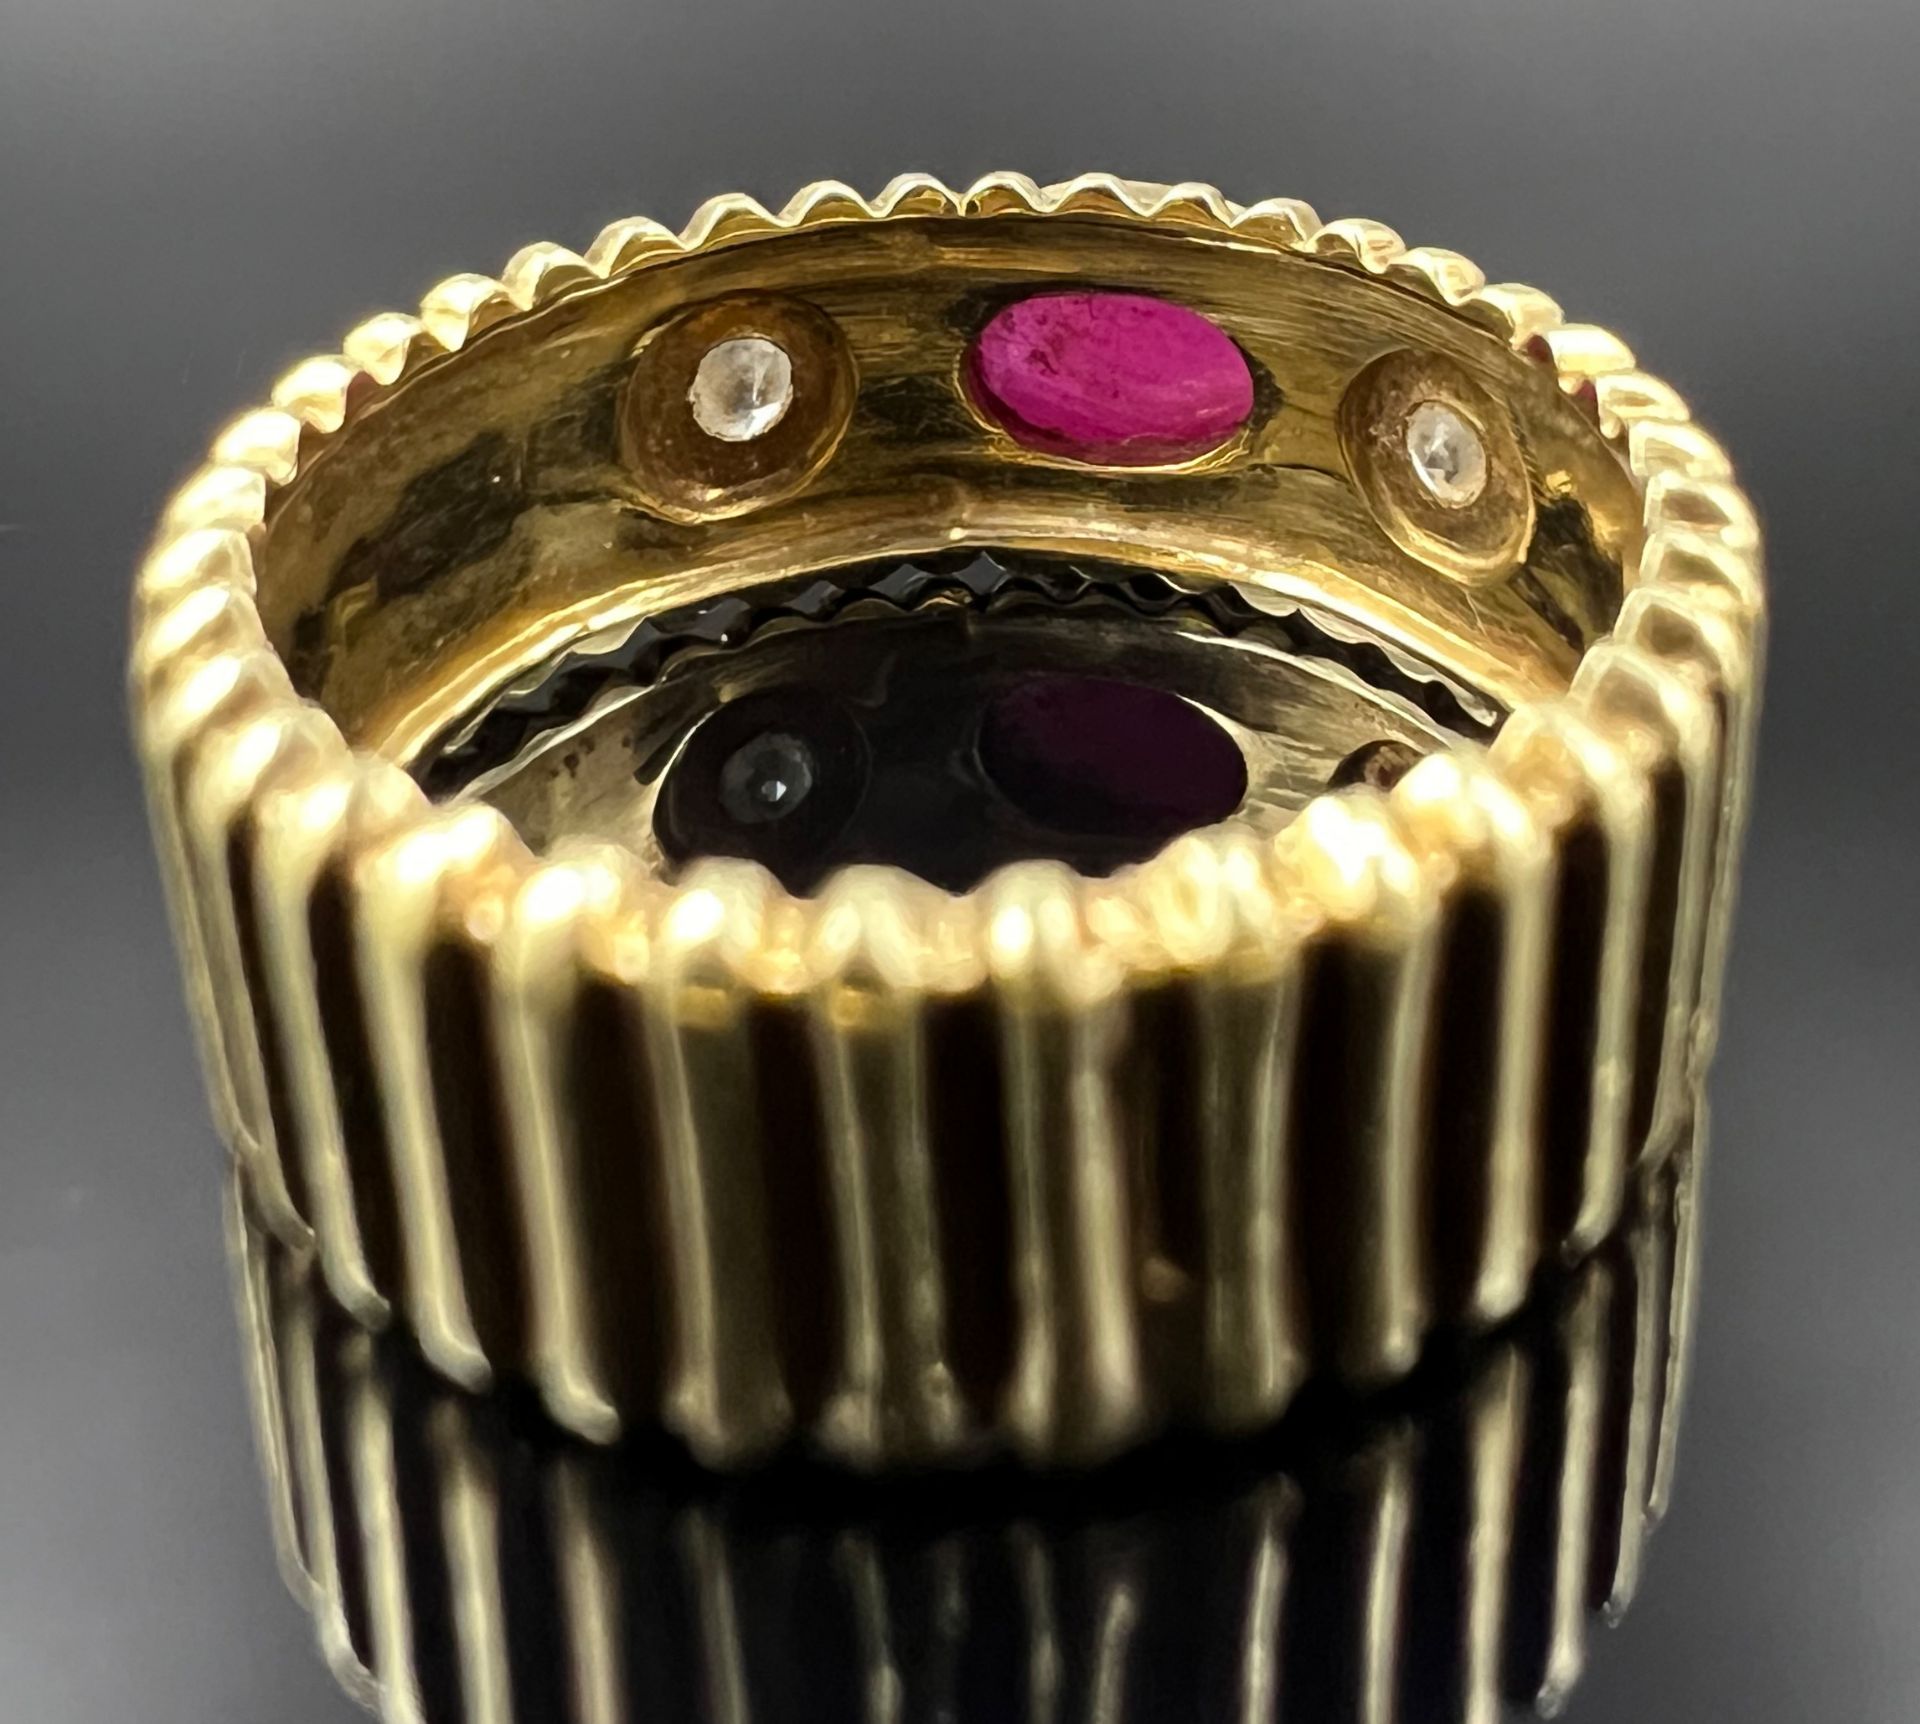 Ladies' ring. 585 yellow gold. 1 coloured stone cabochon and 2 small diamonds. - Image 2 of 8